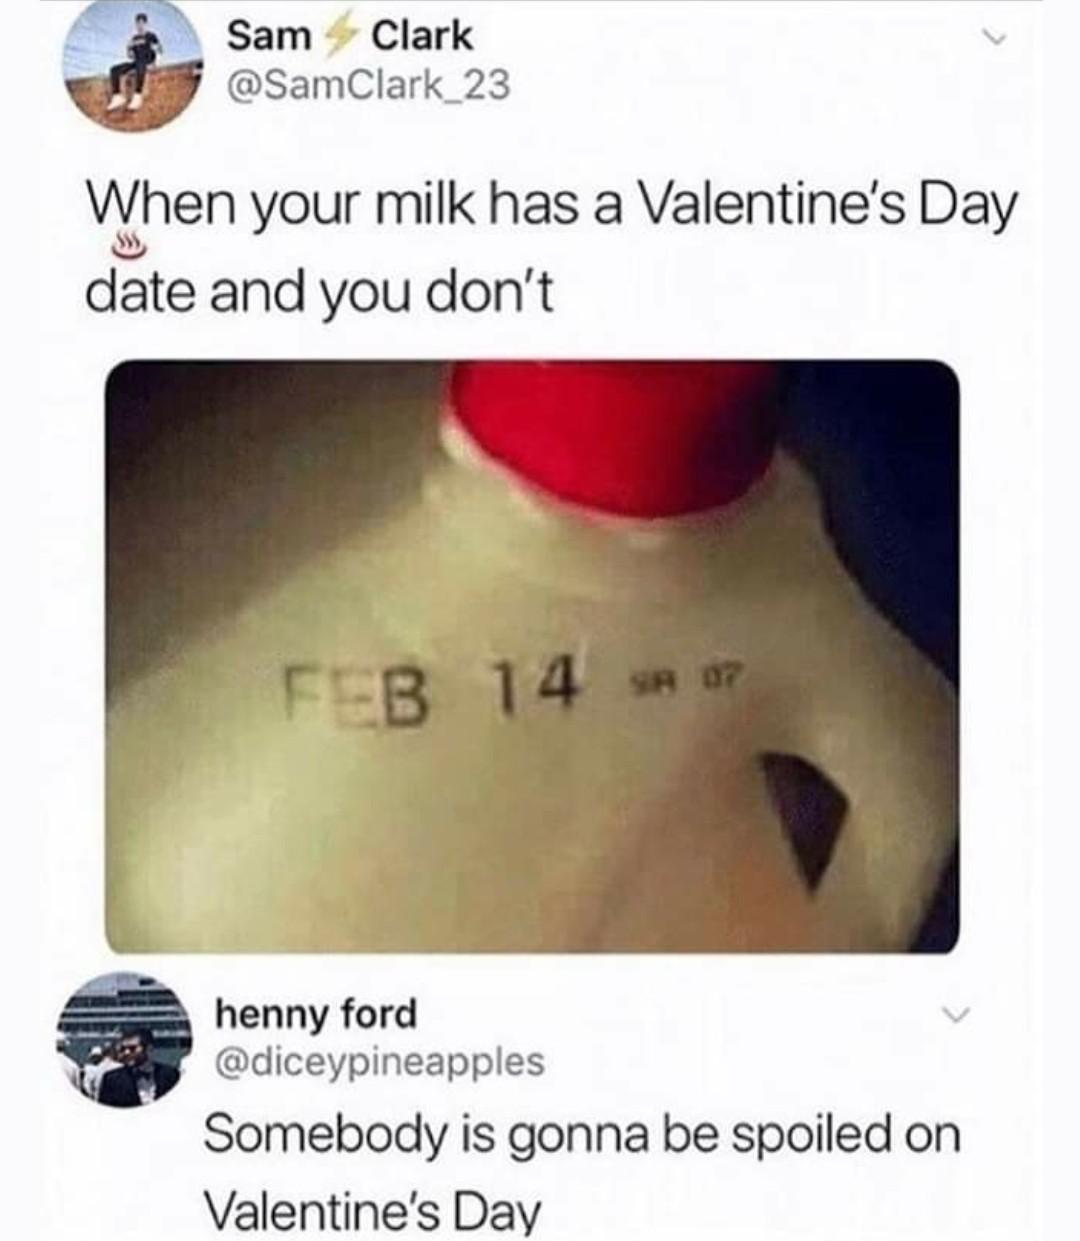 your milk has a valentine's date - Sam Clark Clark_23 When your milk has a Valentine's Day date and you don't Feb 14 ? henny ford Somebody is gonna be spoiled on Valentine's Day